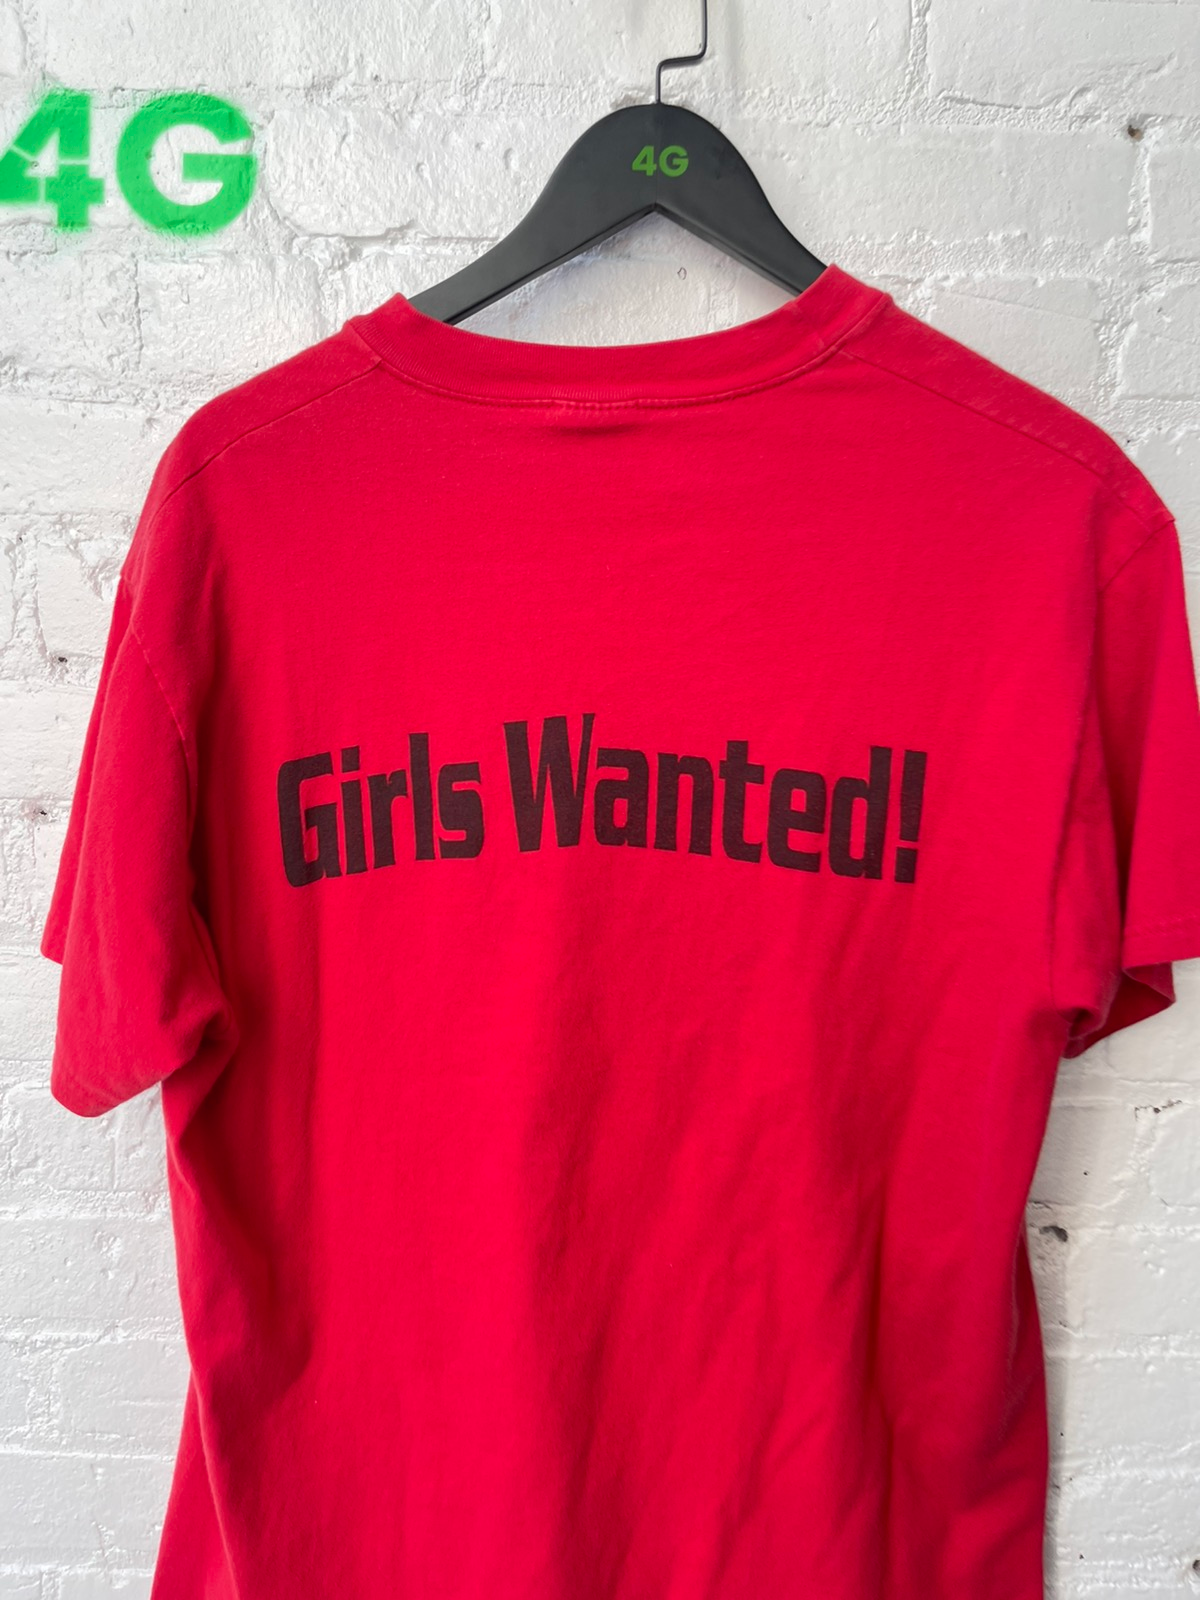 Vintage 90s GIRLS WANTED PORNO PORN SHIRT 4Gseller